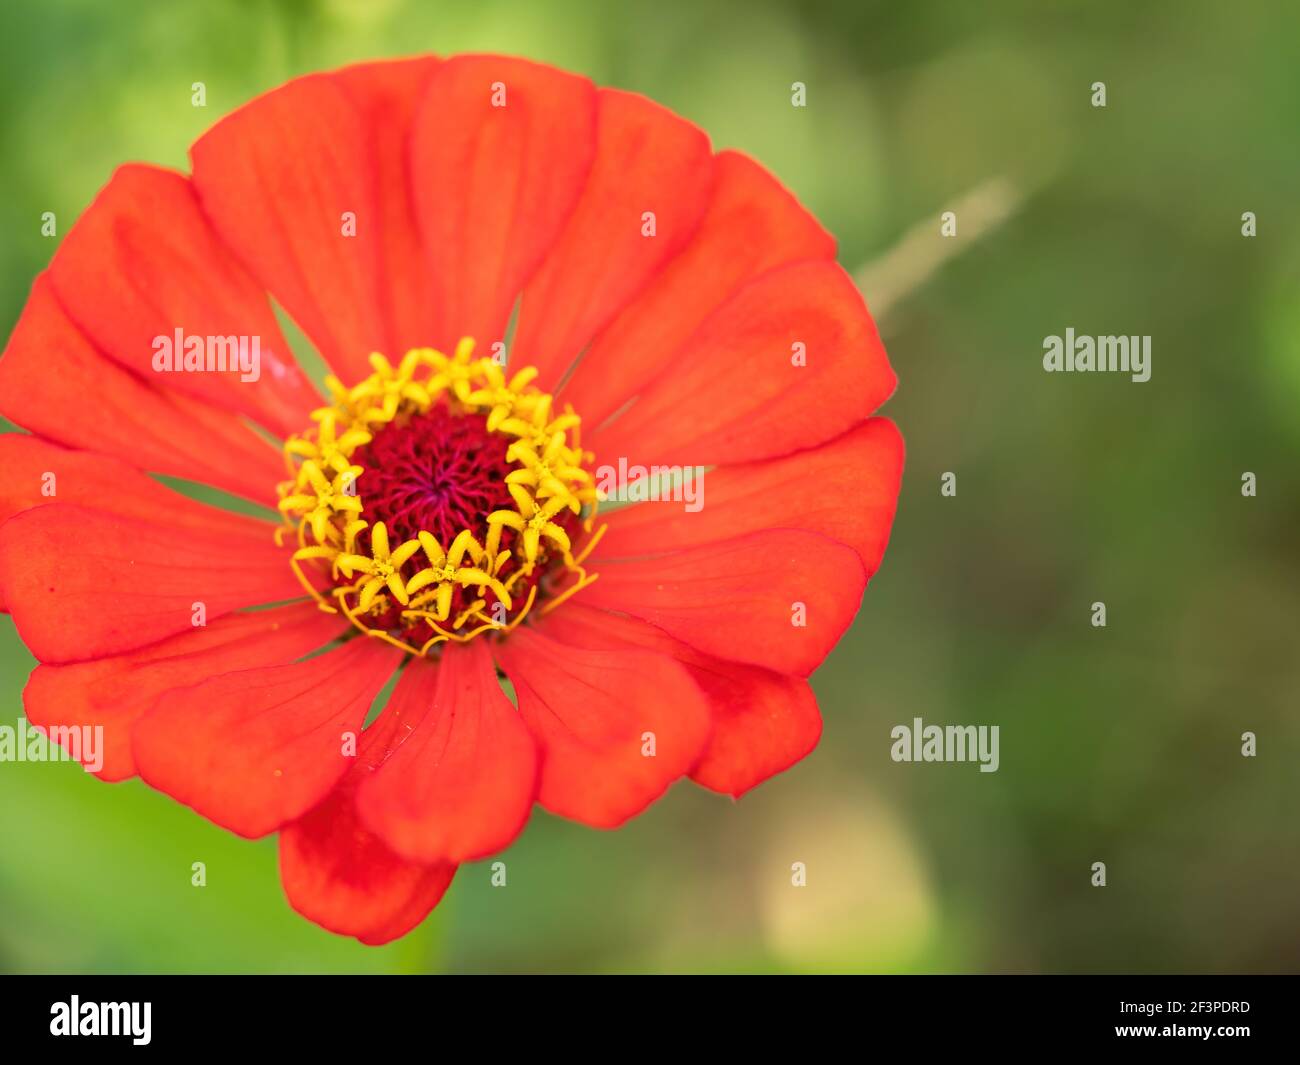 orange zinnia flower with yellow and red center closeup off-center Stock Photo